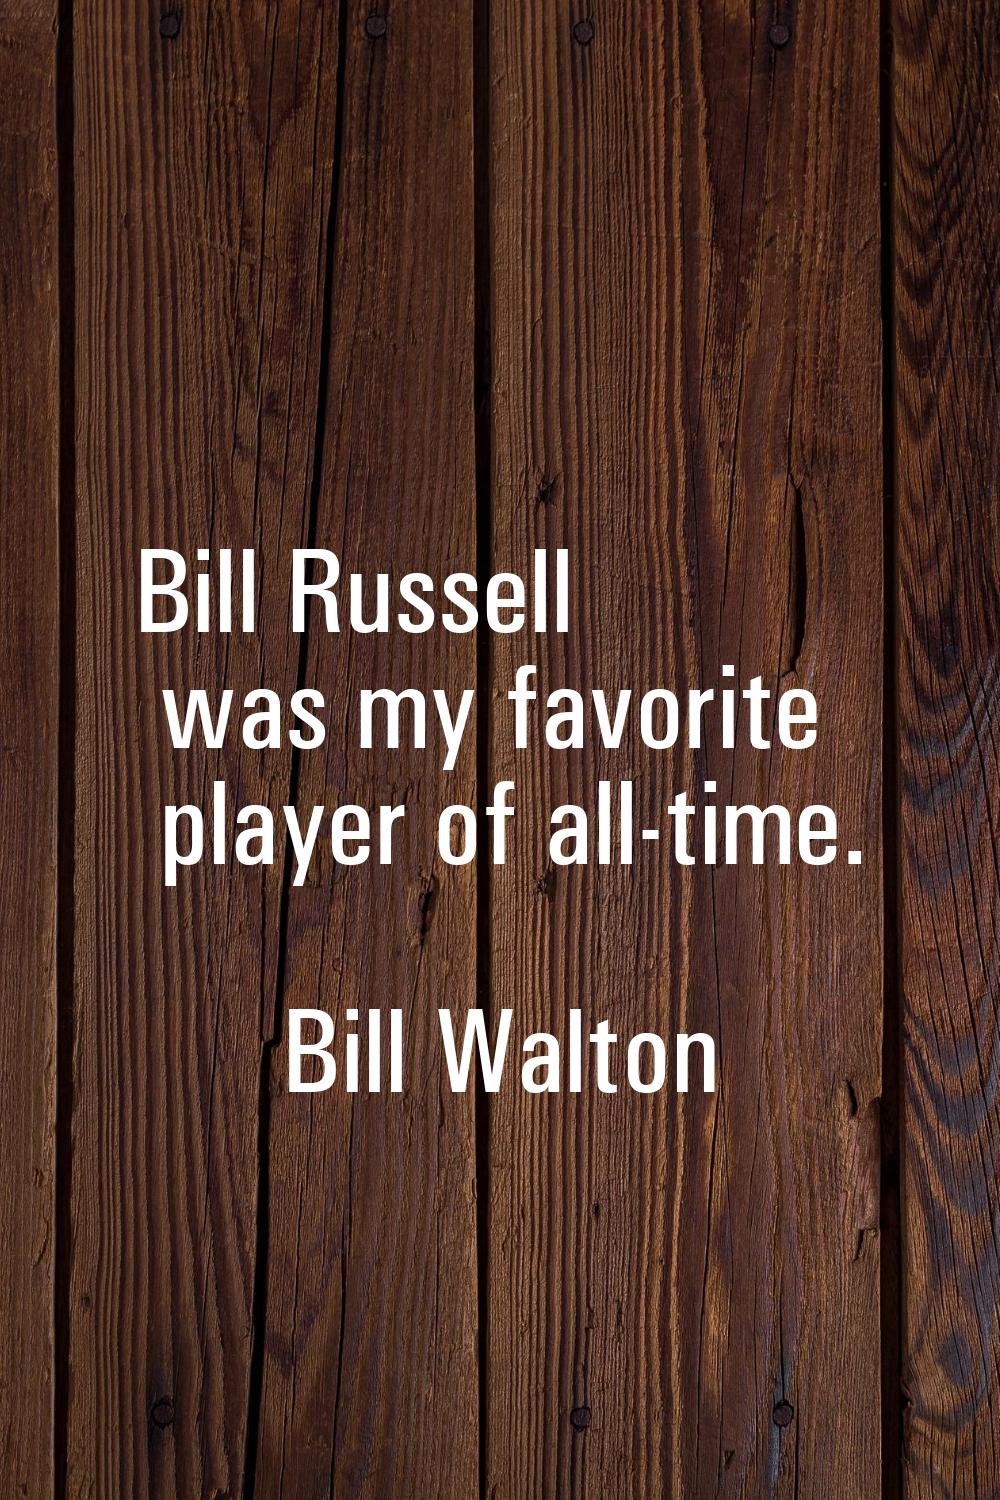 Bill Russell was my favorite player of all-time.